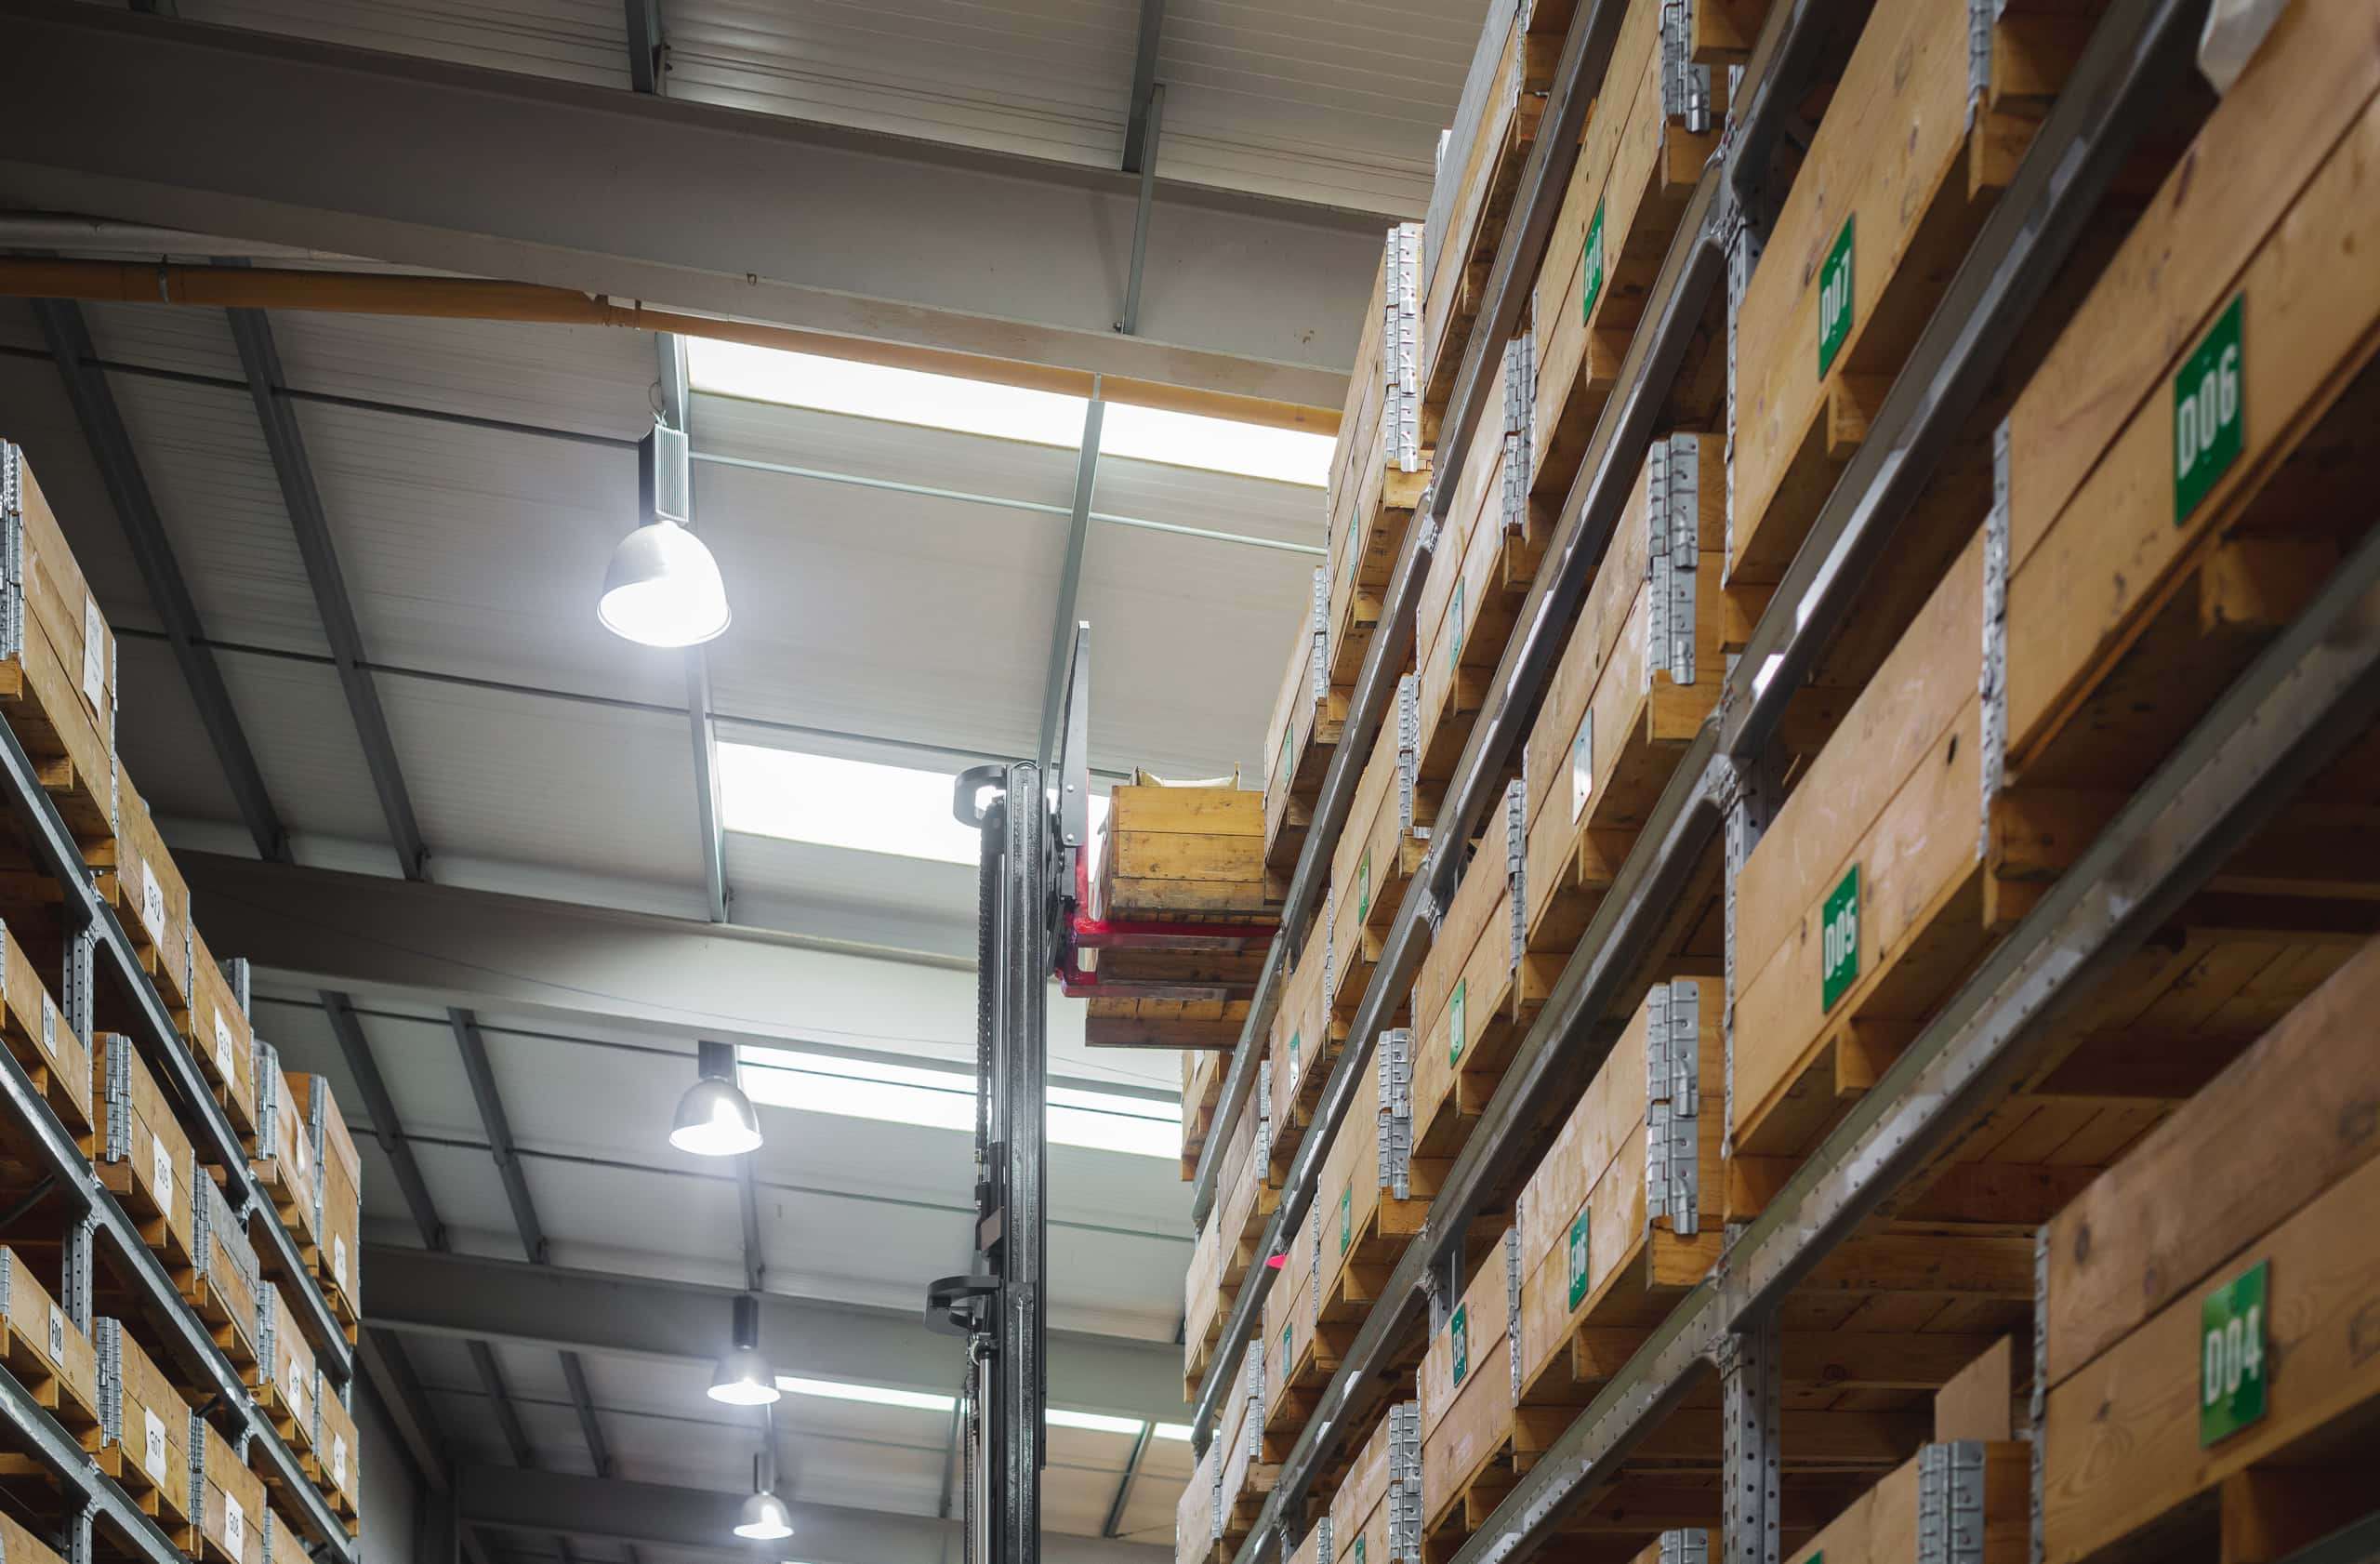 Warehouse shelves with wooden boxes and a fork lift